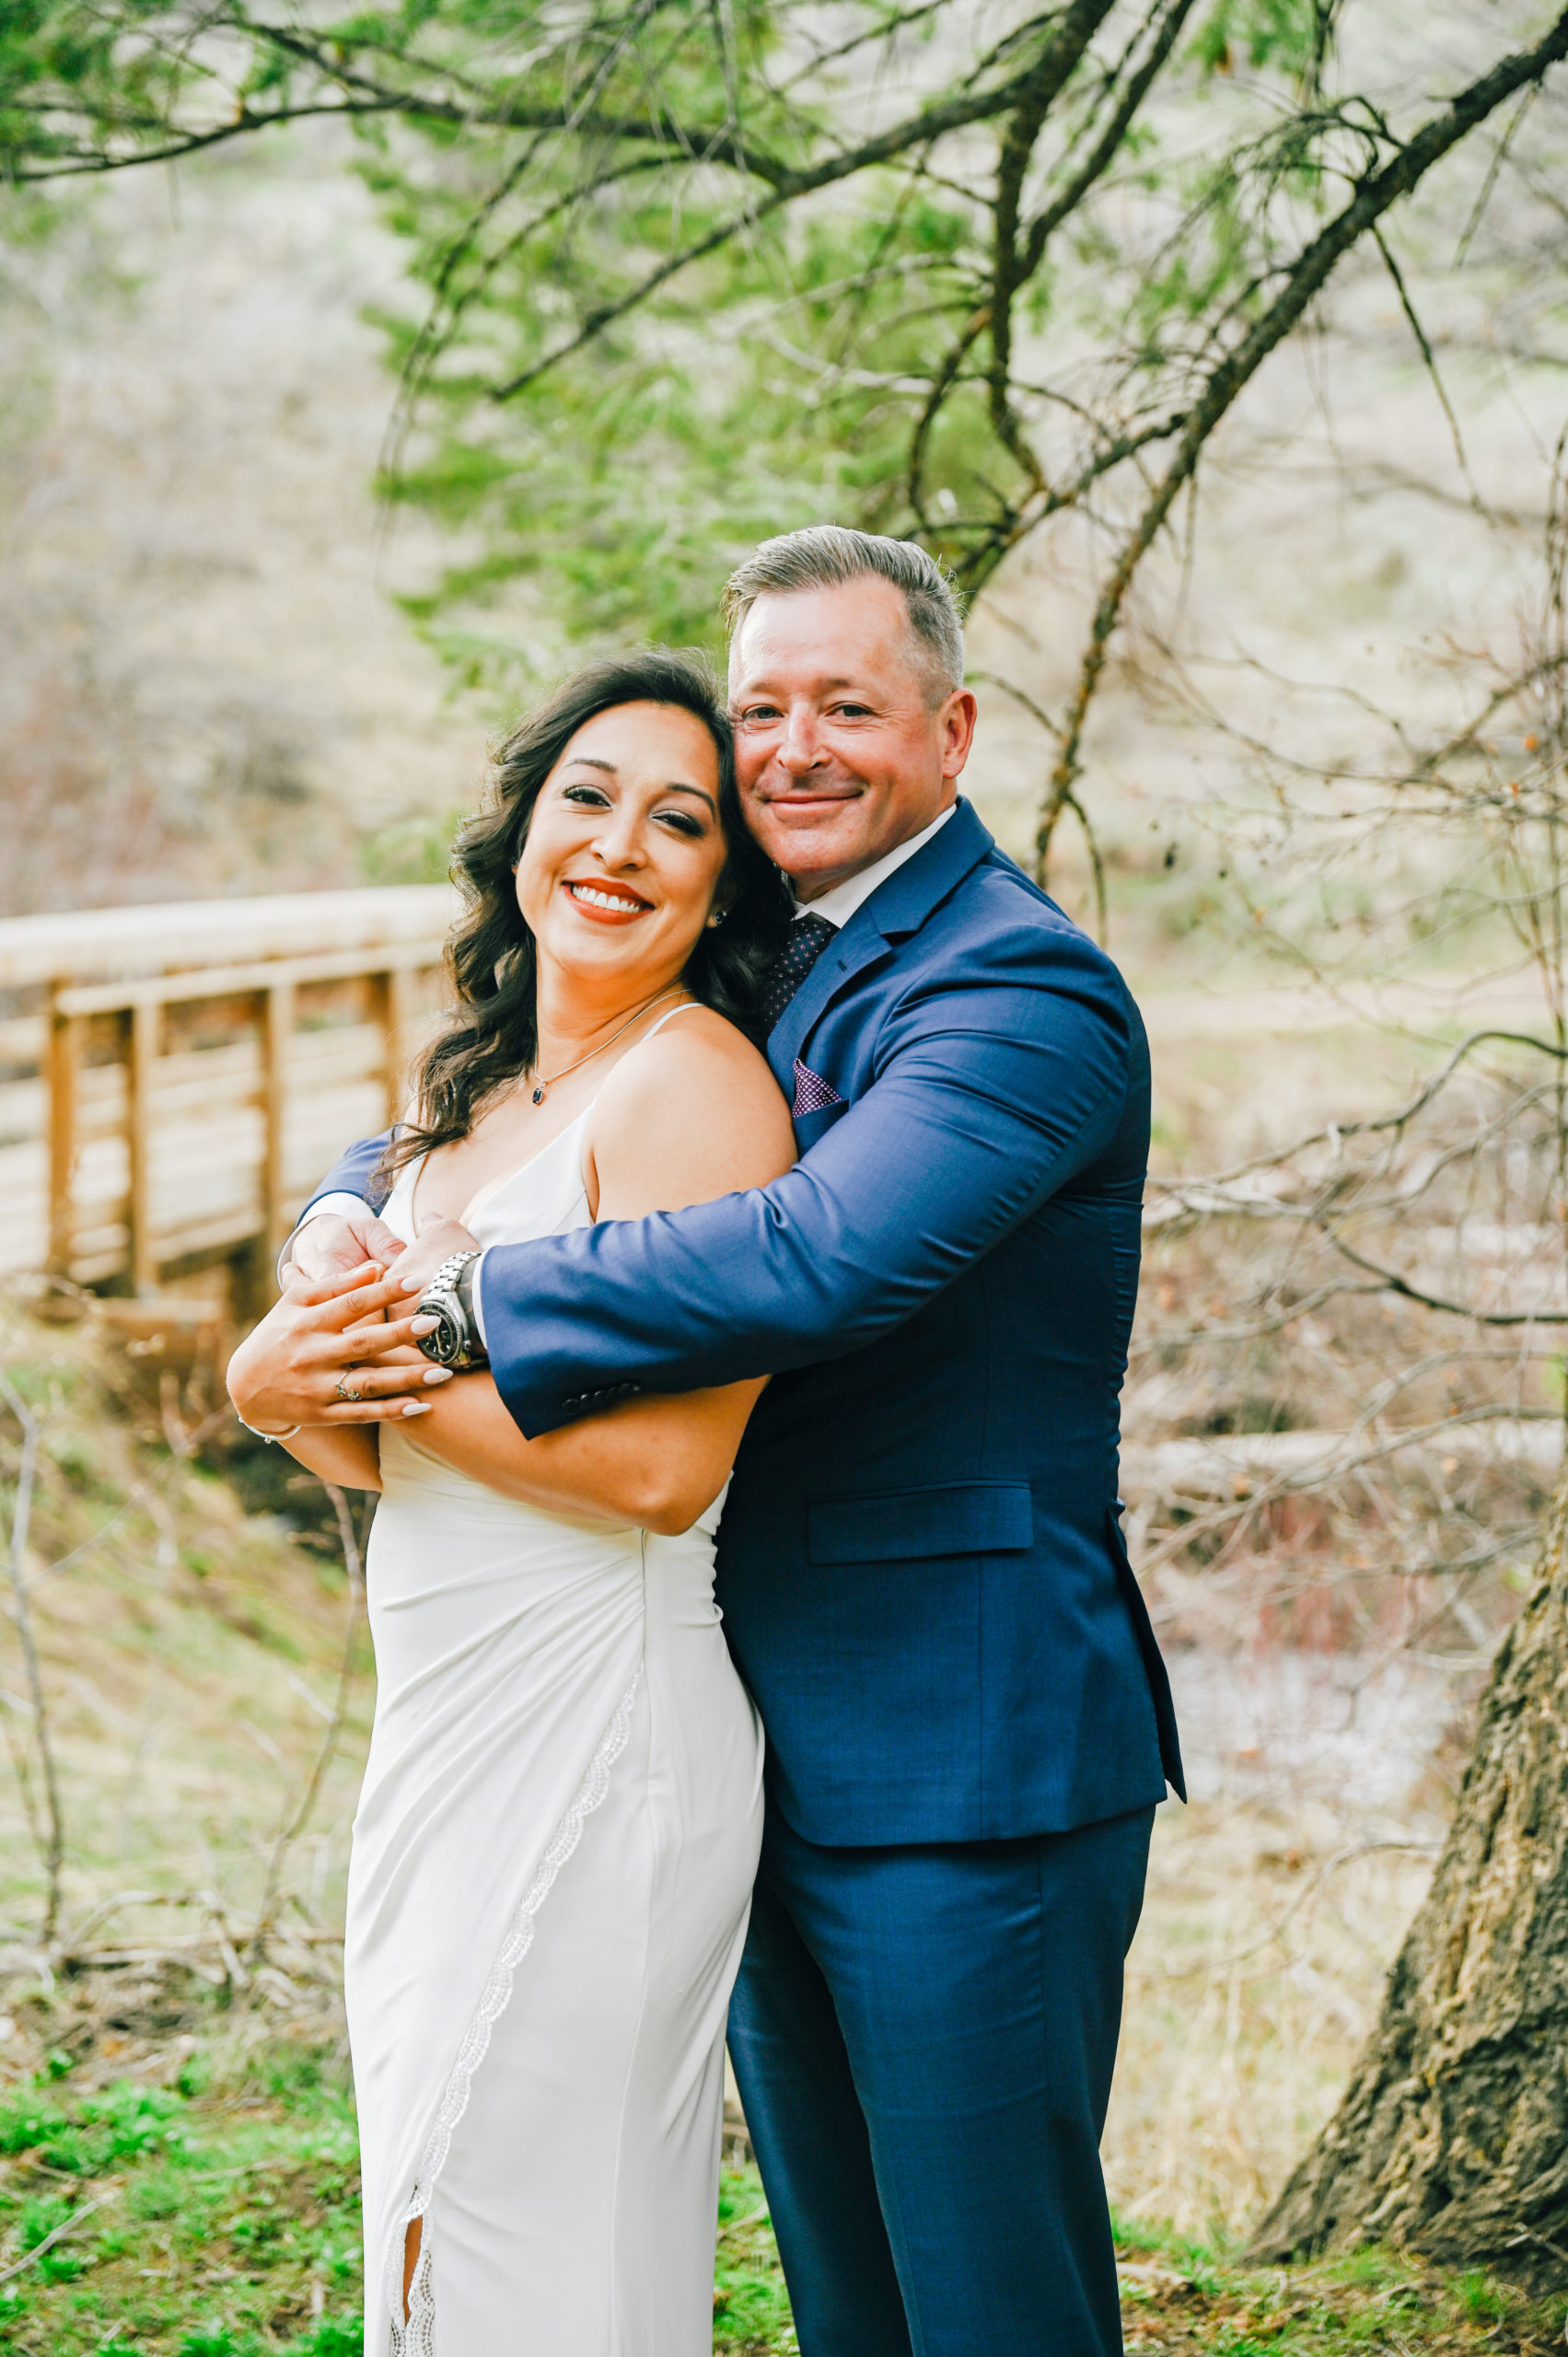 groom standing behind the bride and wrapping his arms around her shoulder with a bridge and forest behind them